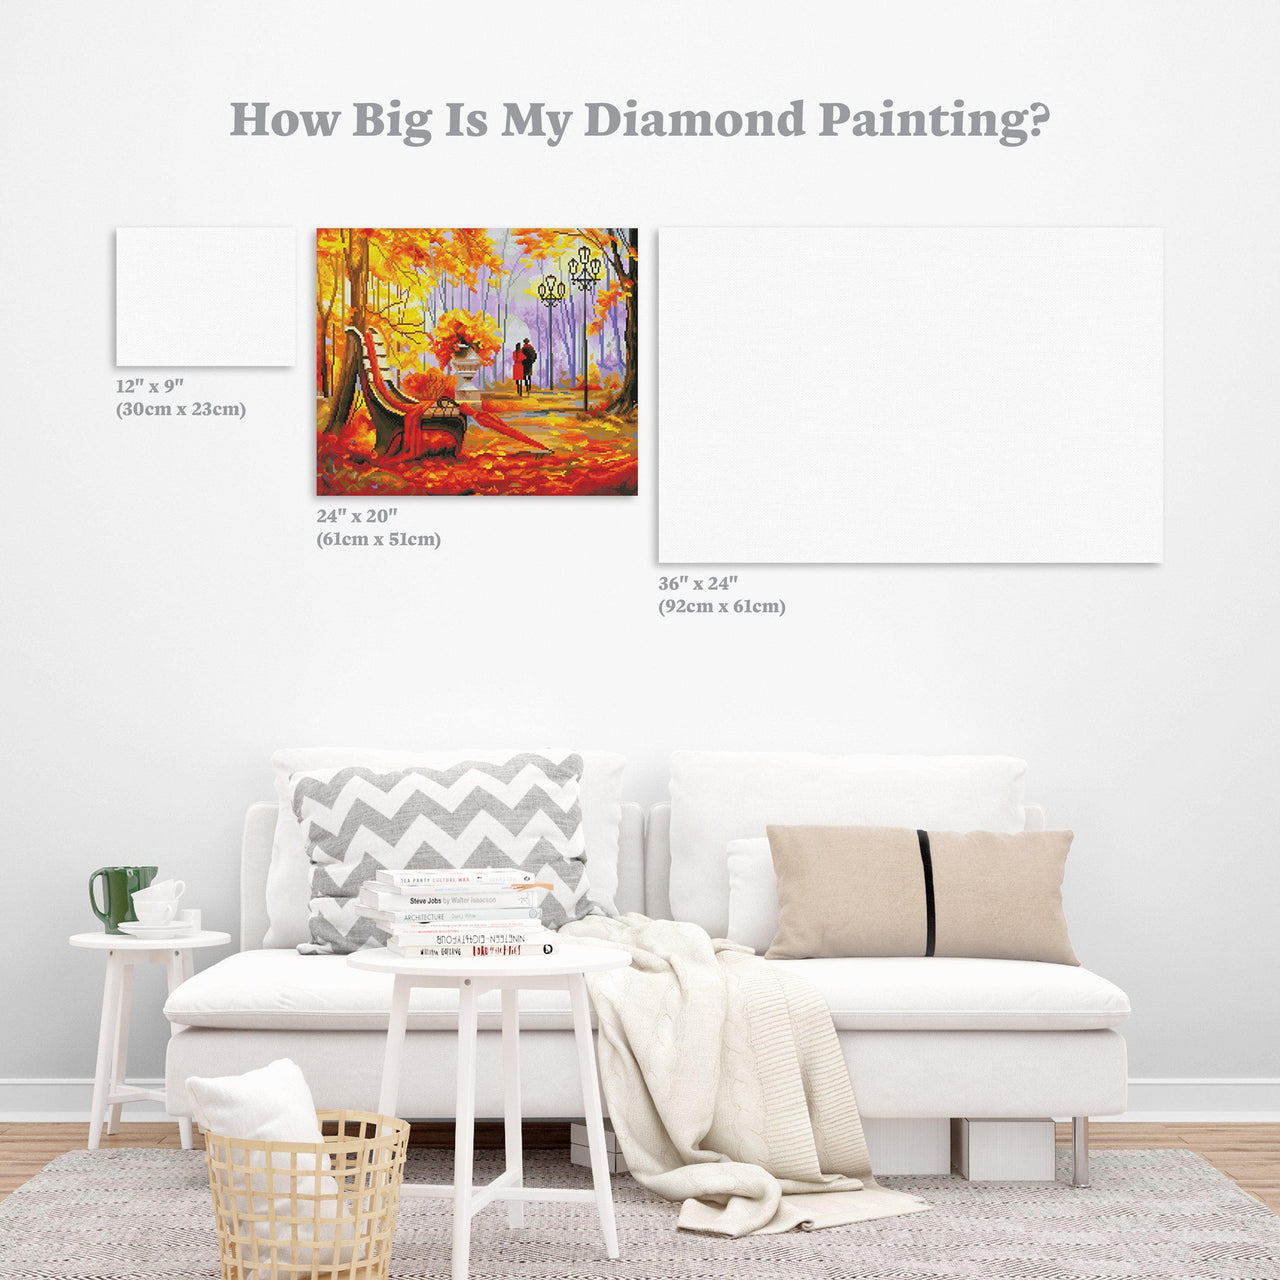 Diamond Painting After The Rain 24" x 20″ (61cm x 51cm) / Round with 40 Colors including 2 ABs